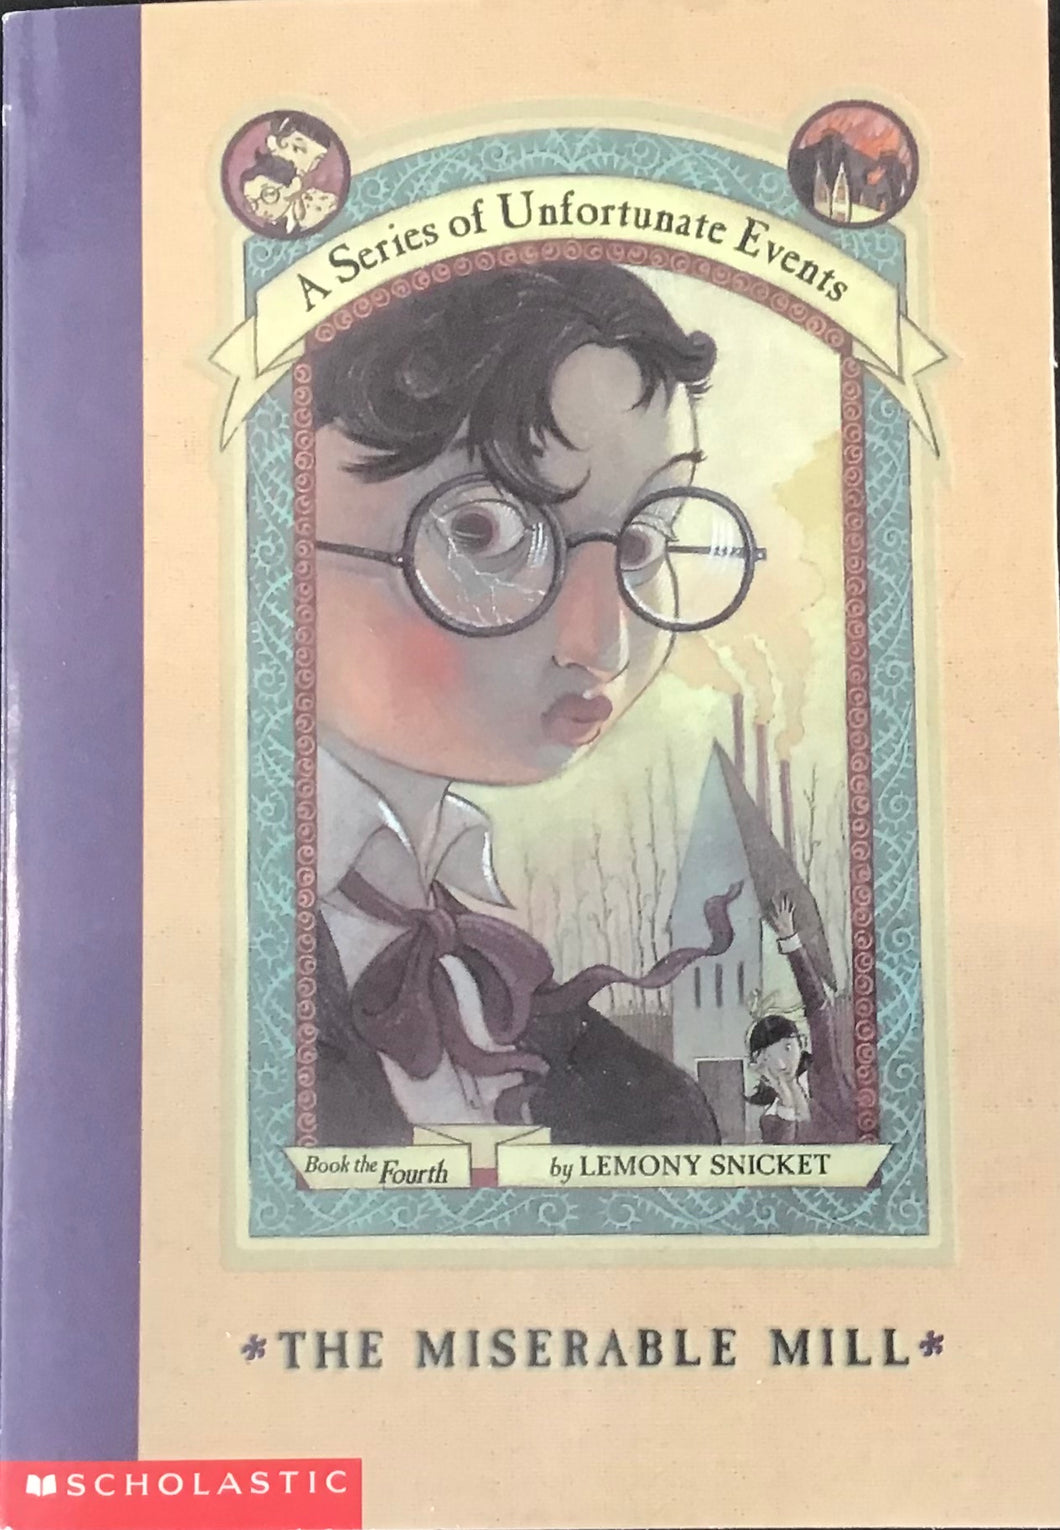 A Series of Unfortunate Events- Lemony Snicket